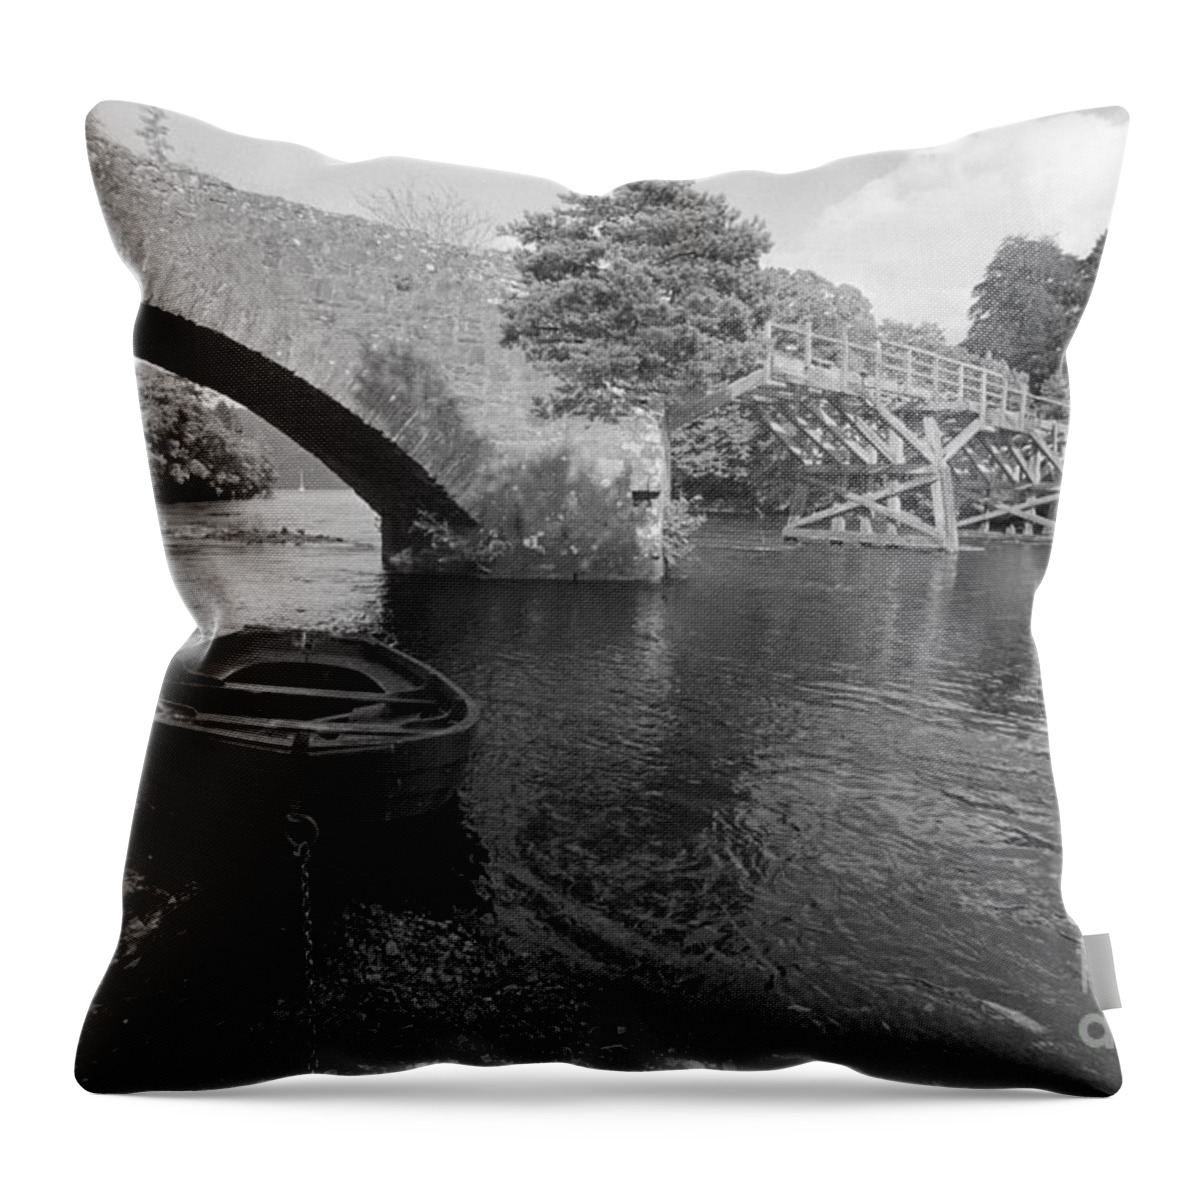 Loch Ness Throw Pillow featuring the photograph Old bridge on river Oich by Riccardo Mottola